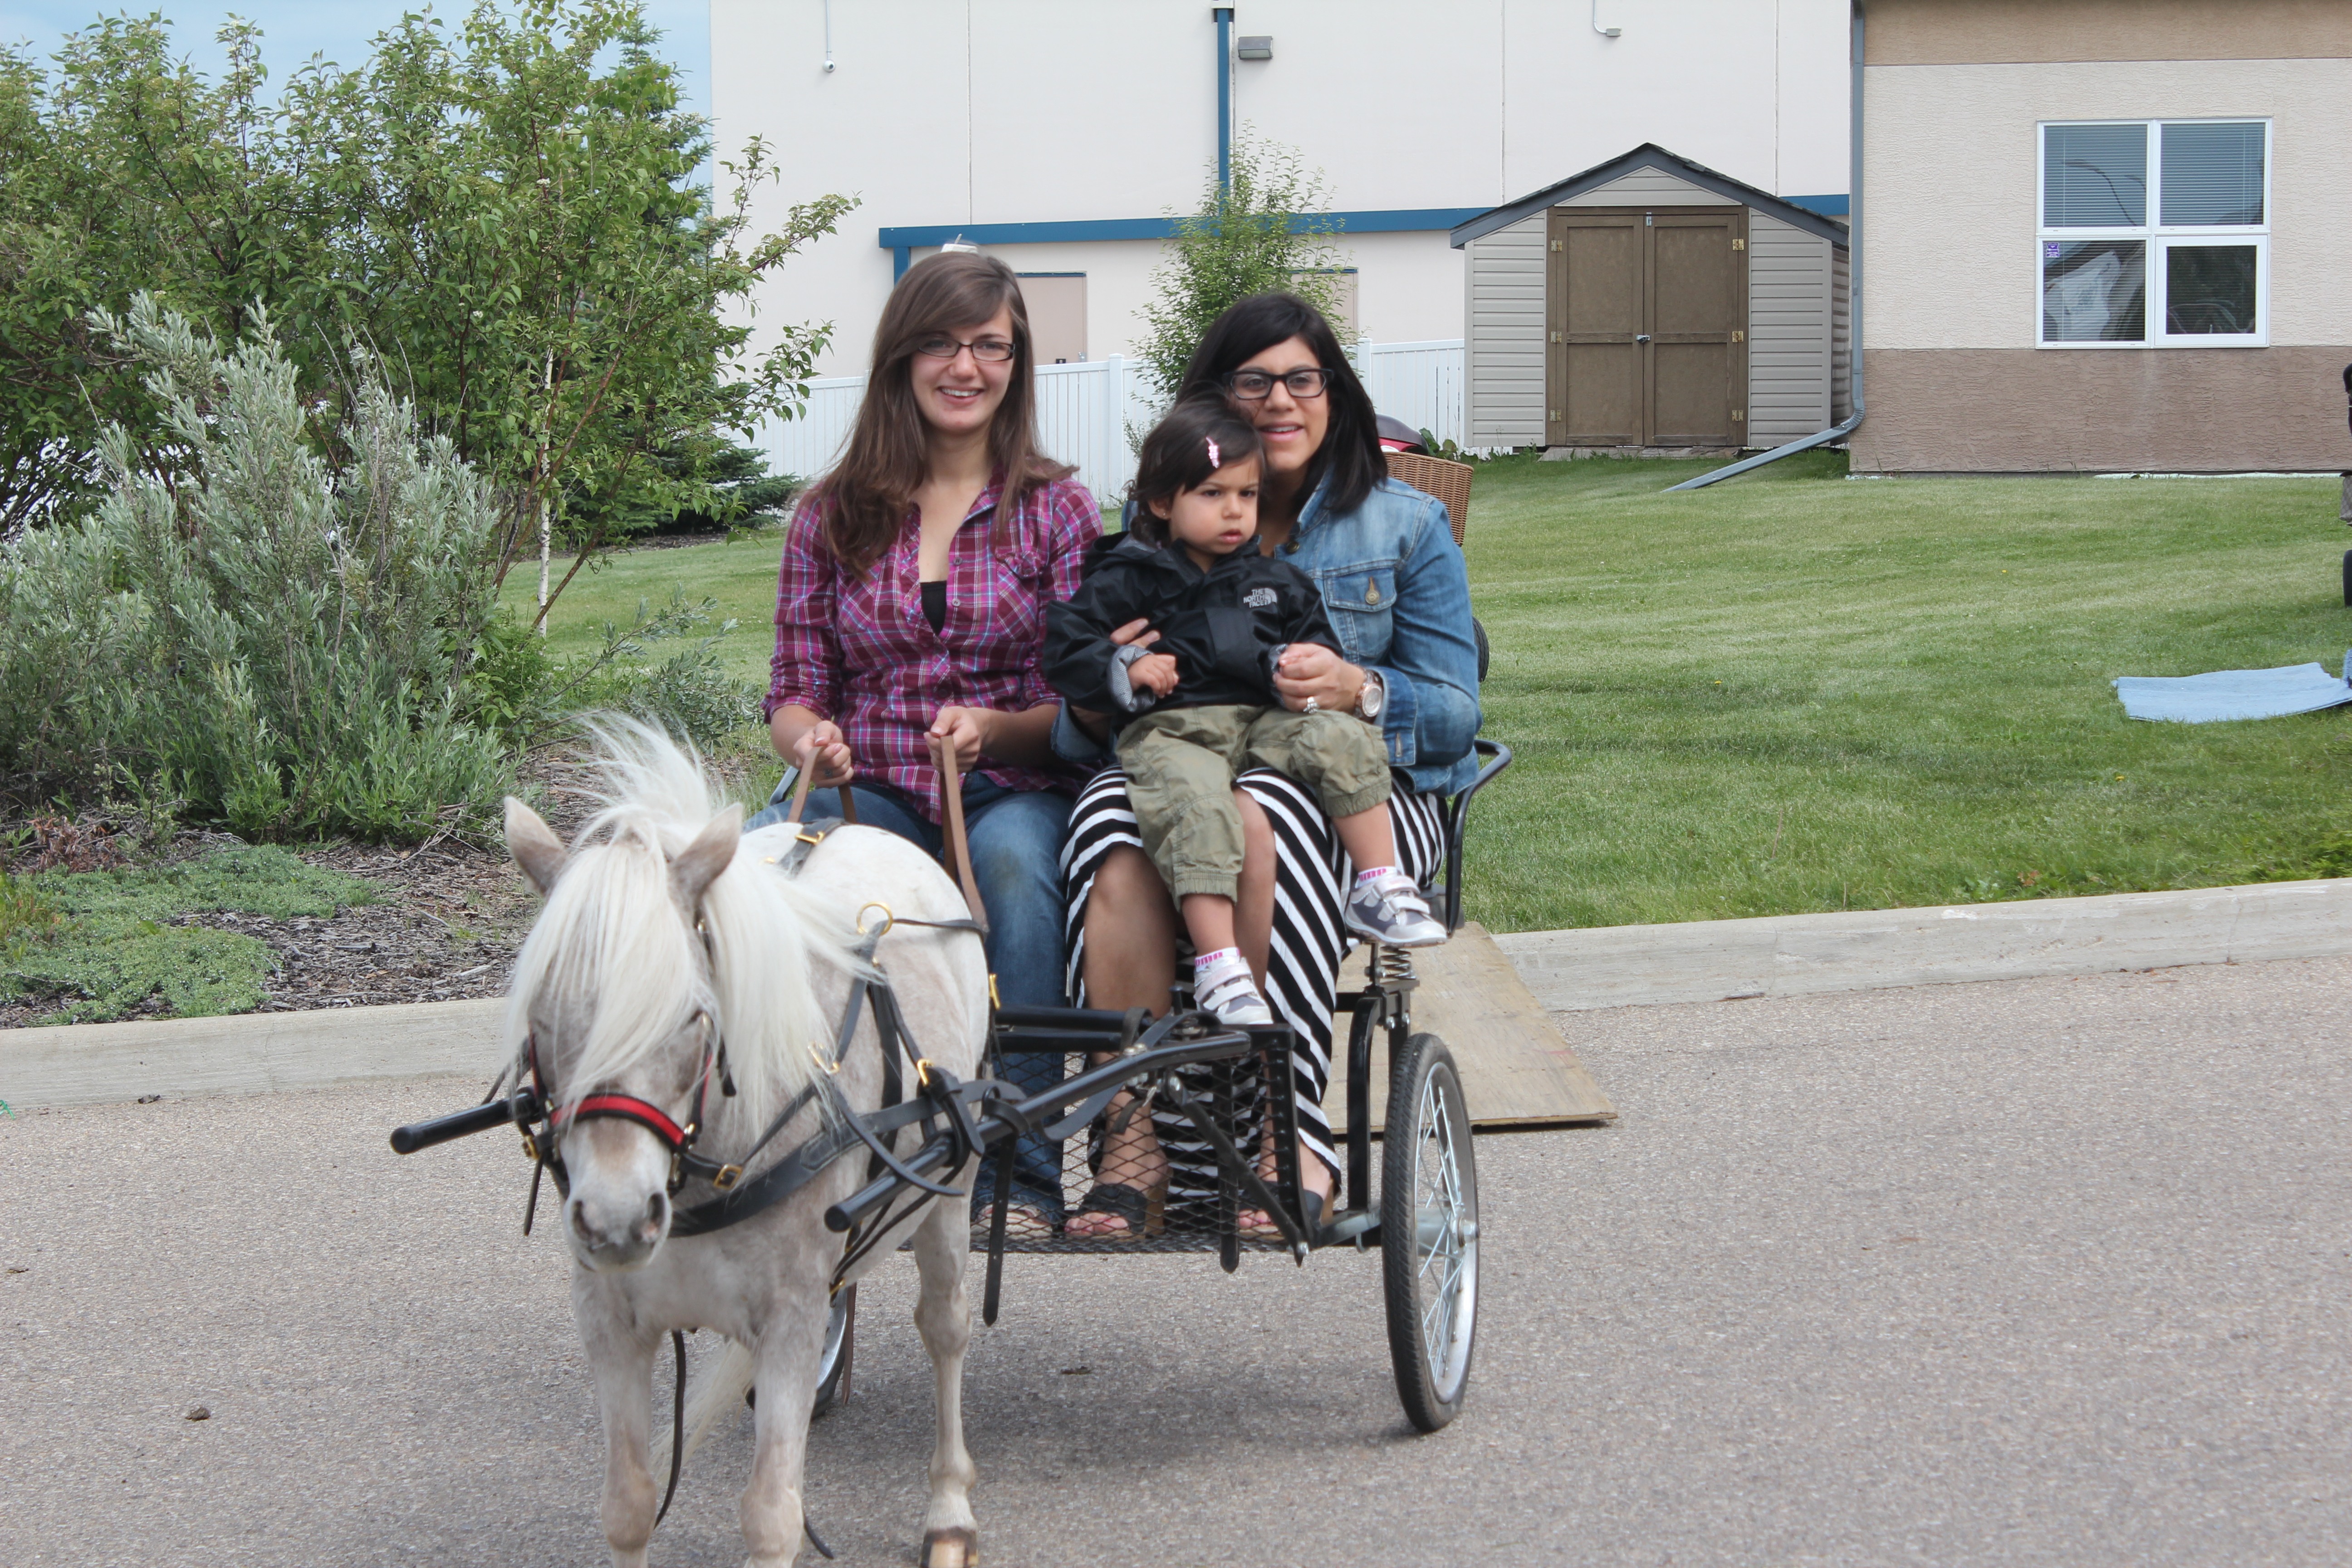 CARRIAGE RIDE- Shazma Charania and her daughter Reya enjoy a trot around the parking lot of the Davenport Church of Christ at an Old Time Country Fair this past weekend.